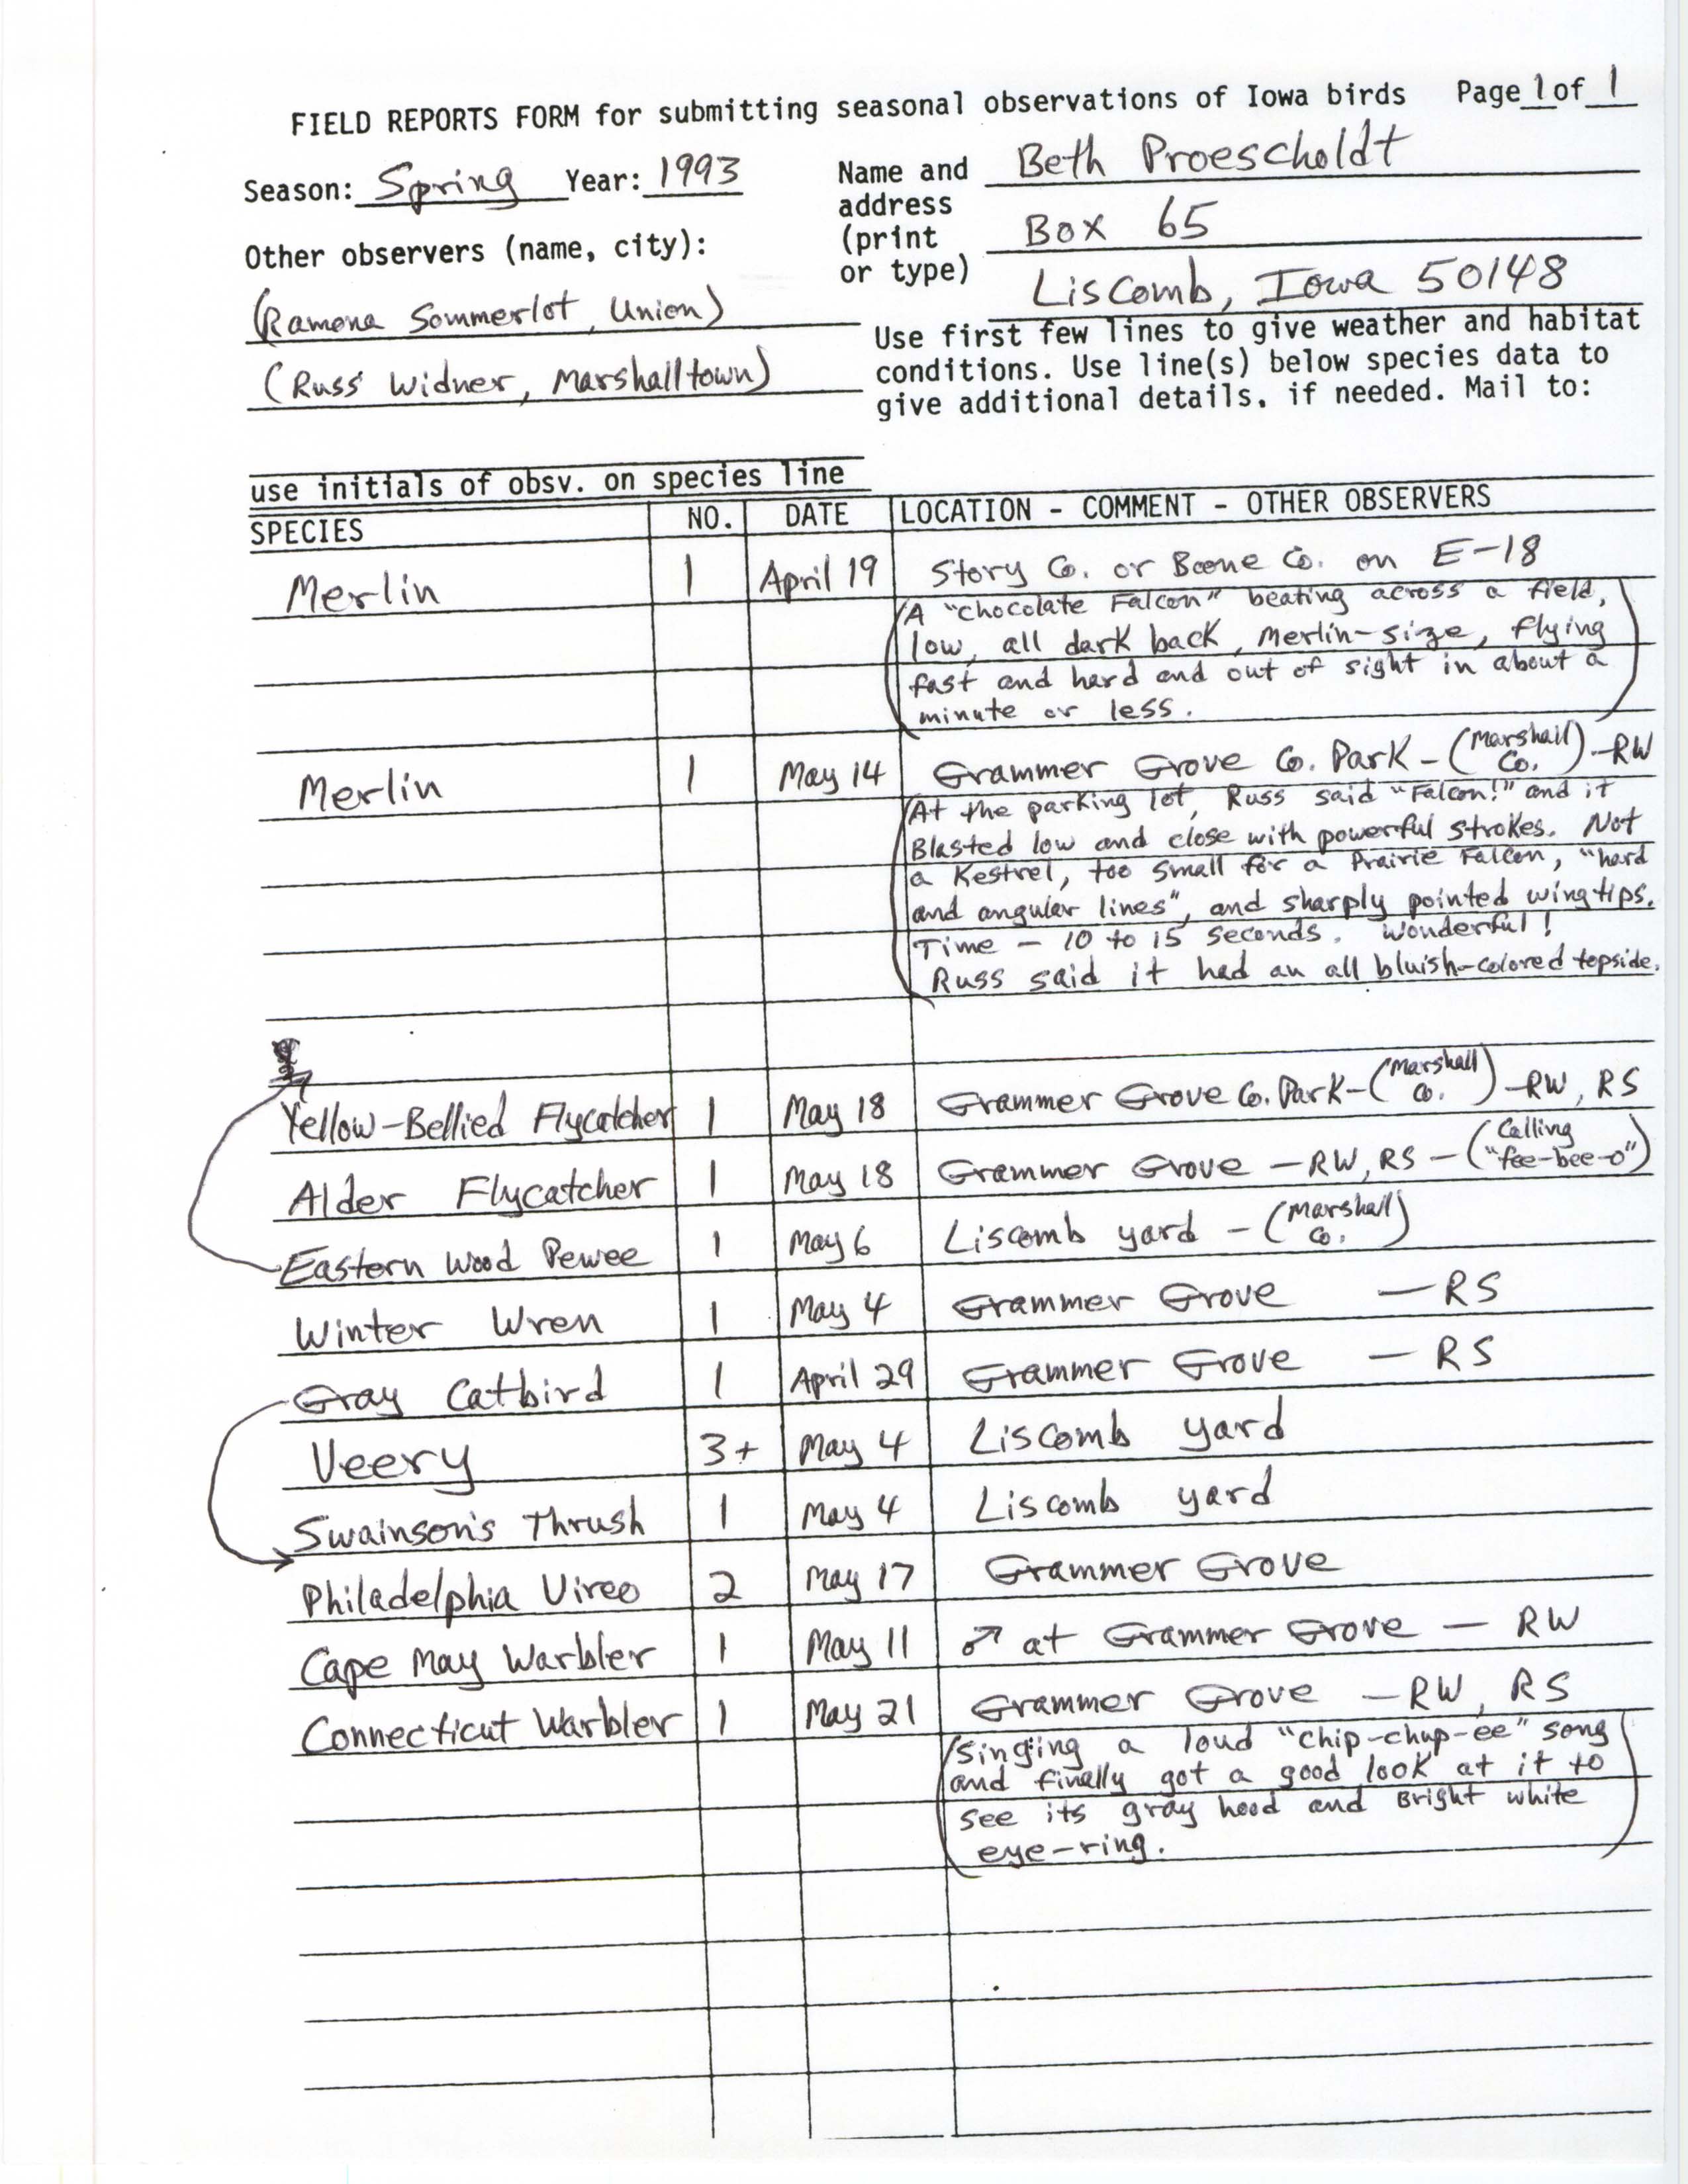 Field reports form for submitting seasonal observations of Iowa birds, Beth Proescholdt, Spring 1993